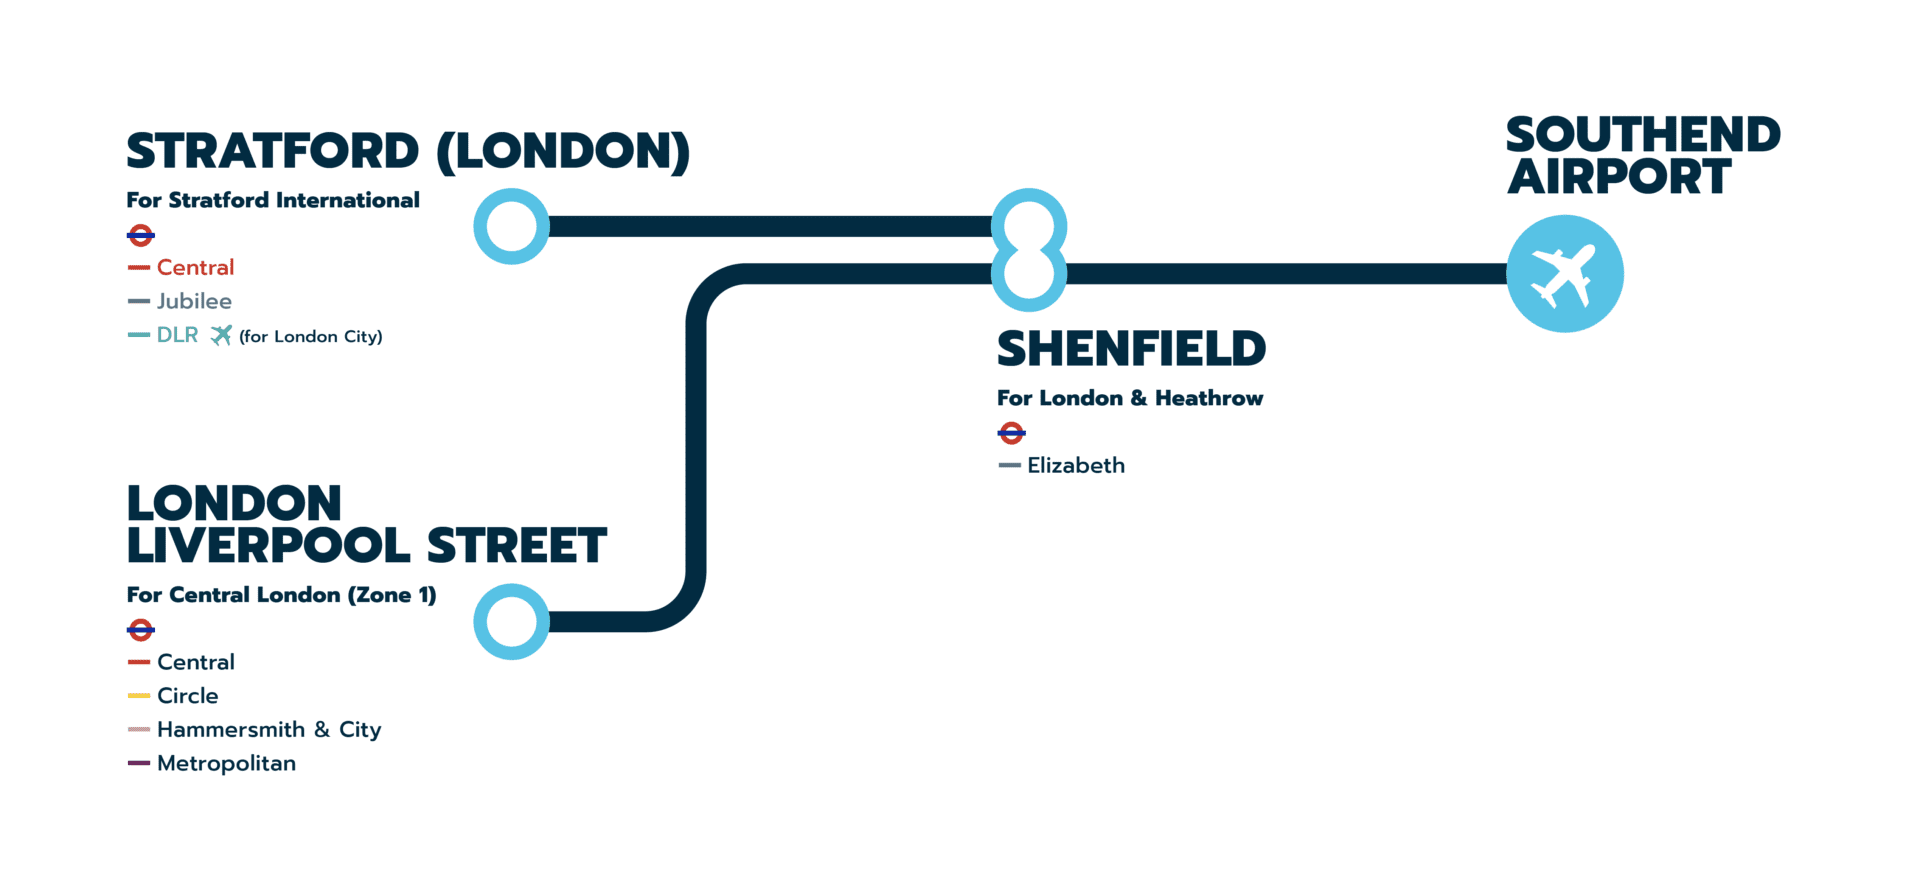 Rail connectivity from Central London via Stratford or London Liverpool Street to Southend Airport